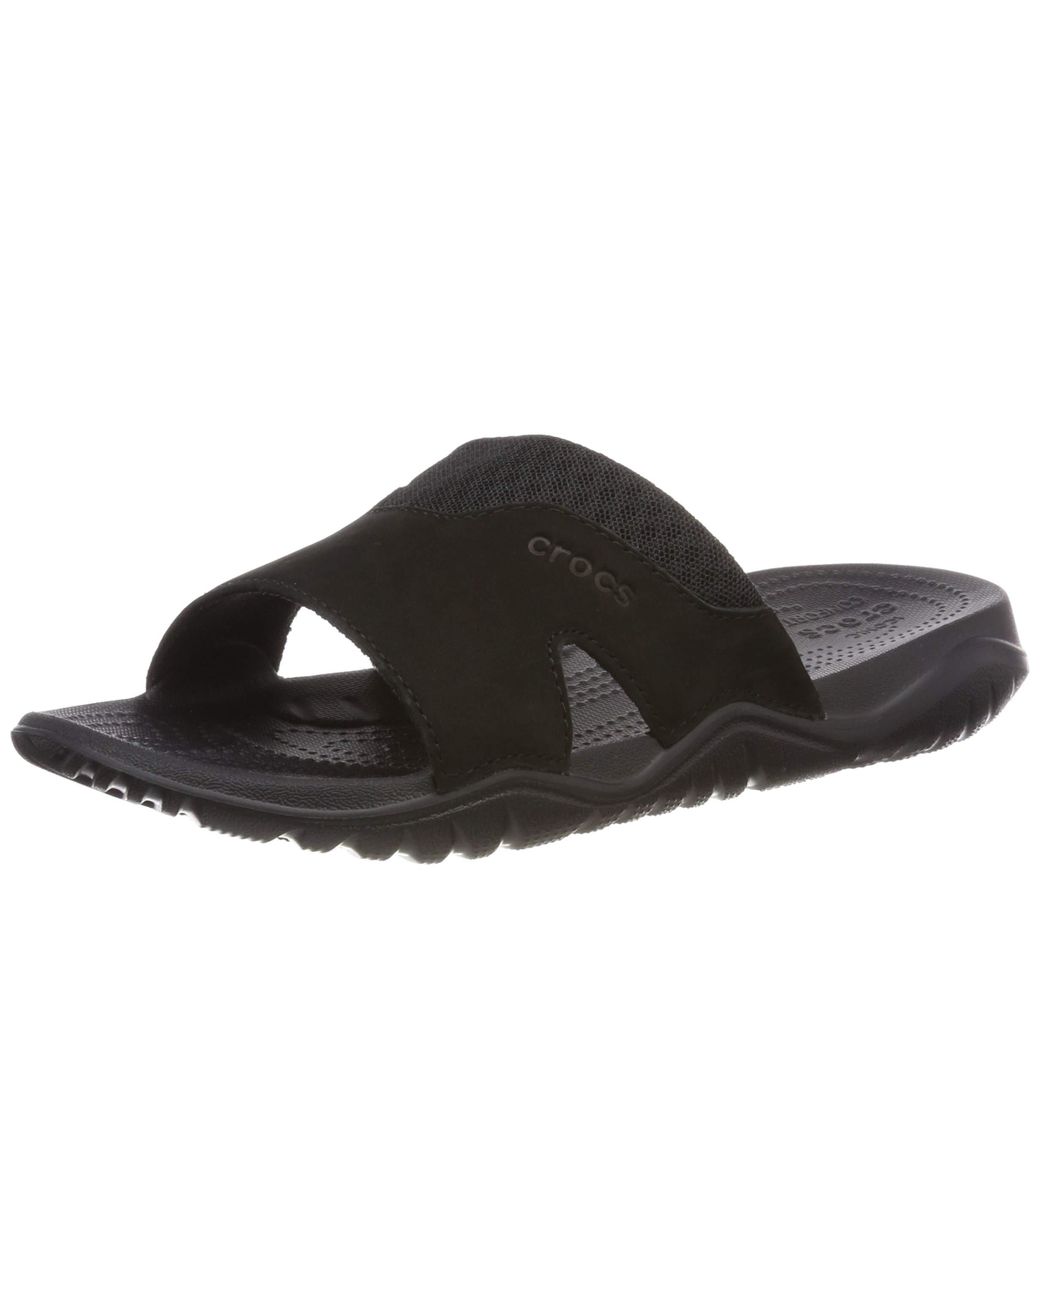 crocs swiftwater leather slide